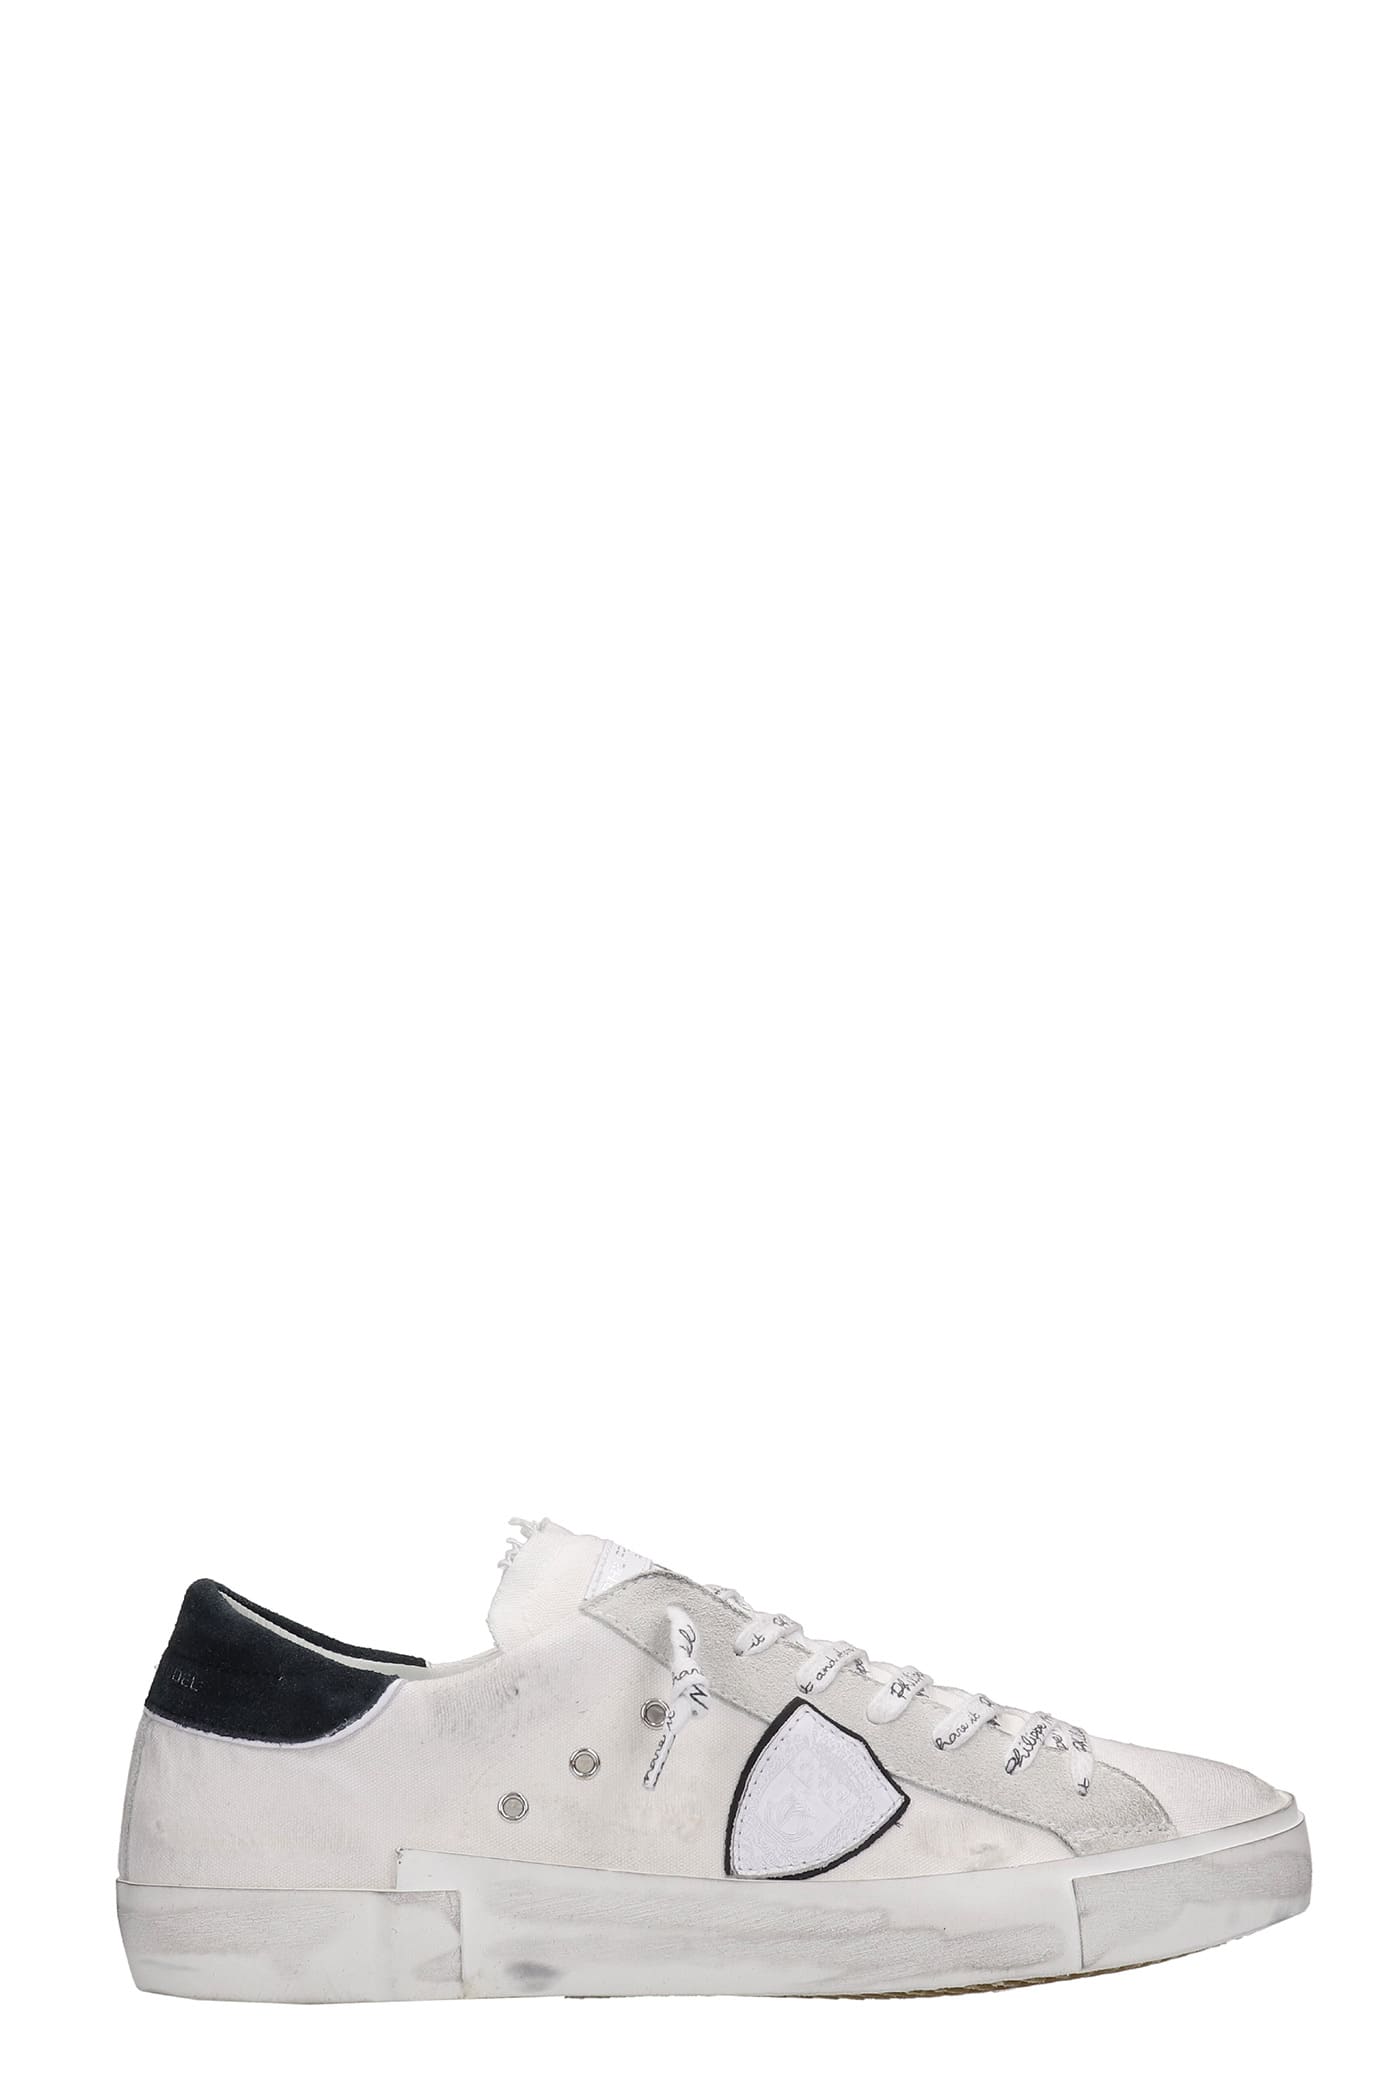 Philippe Model Prsx Sneakers In White Canvas